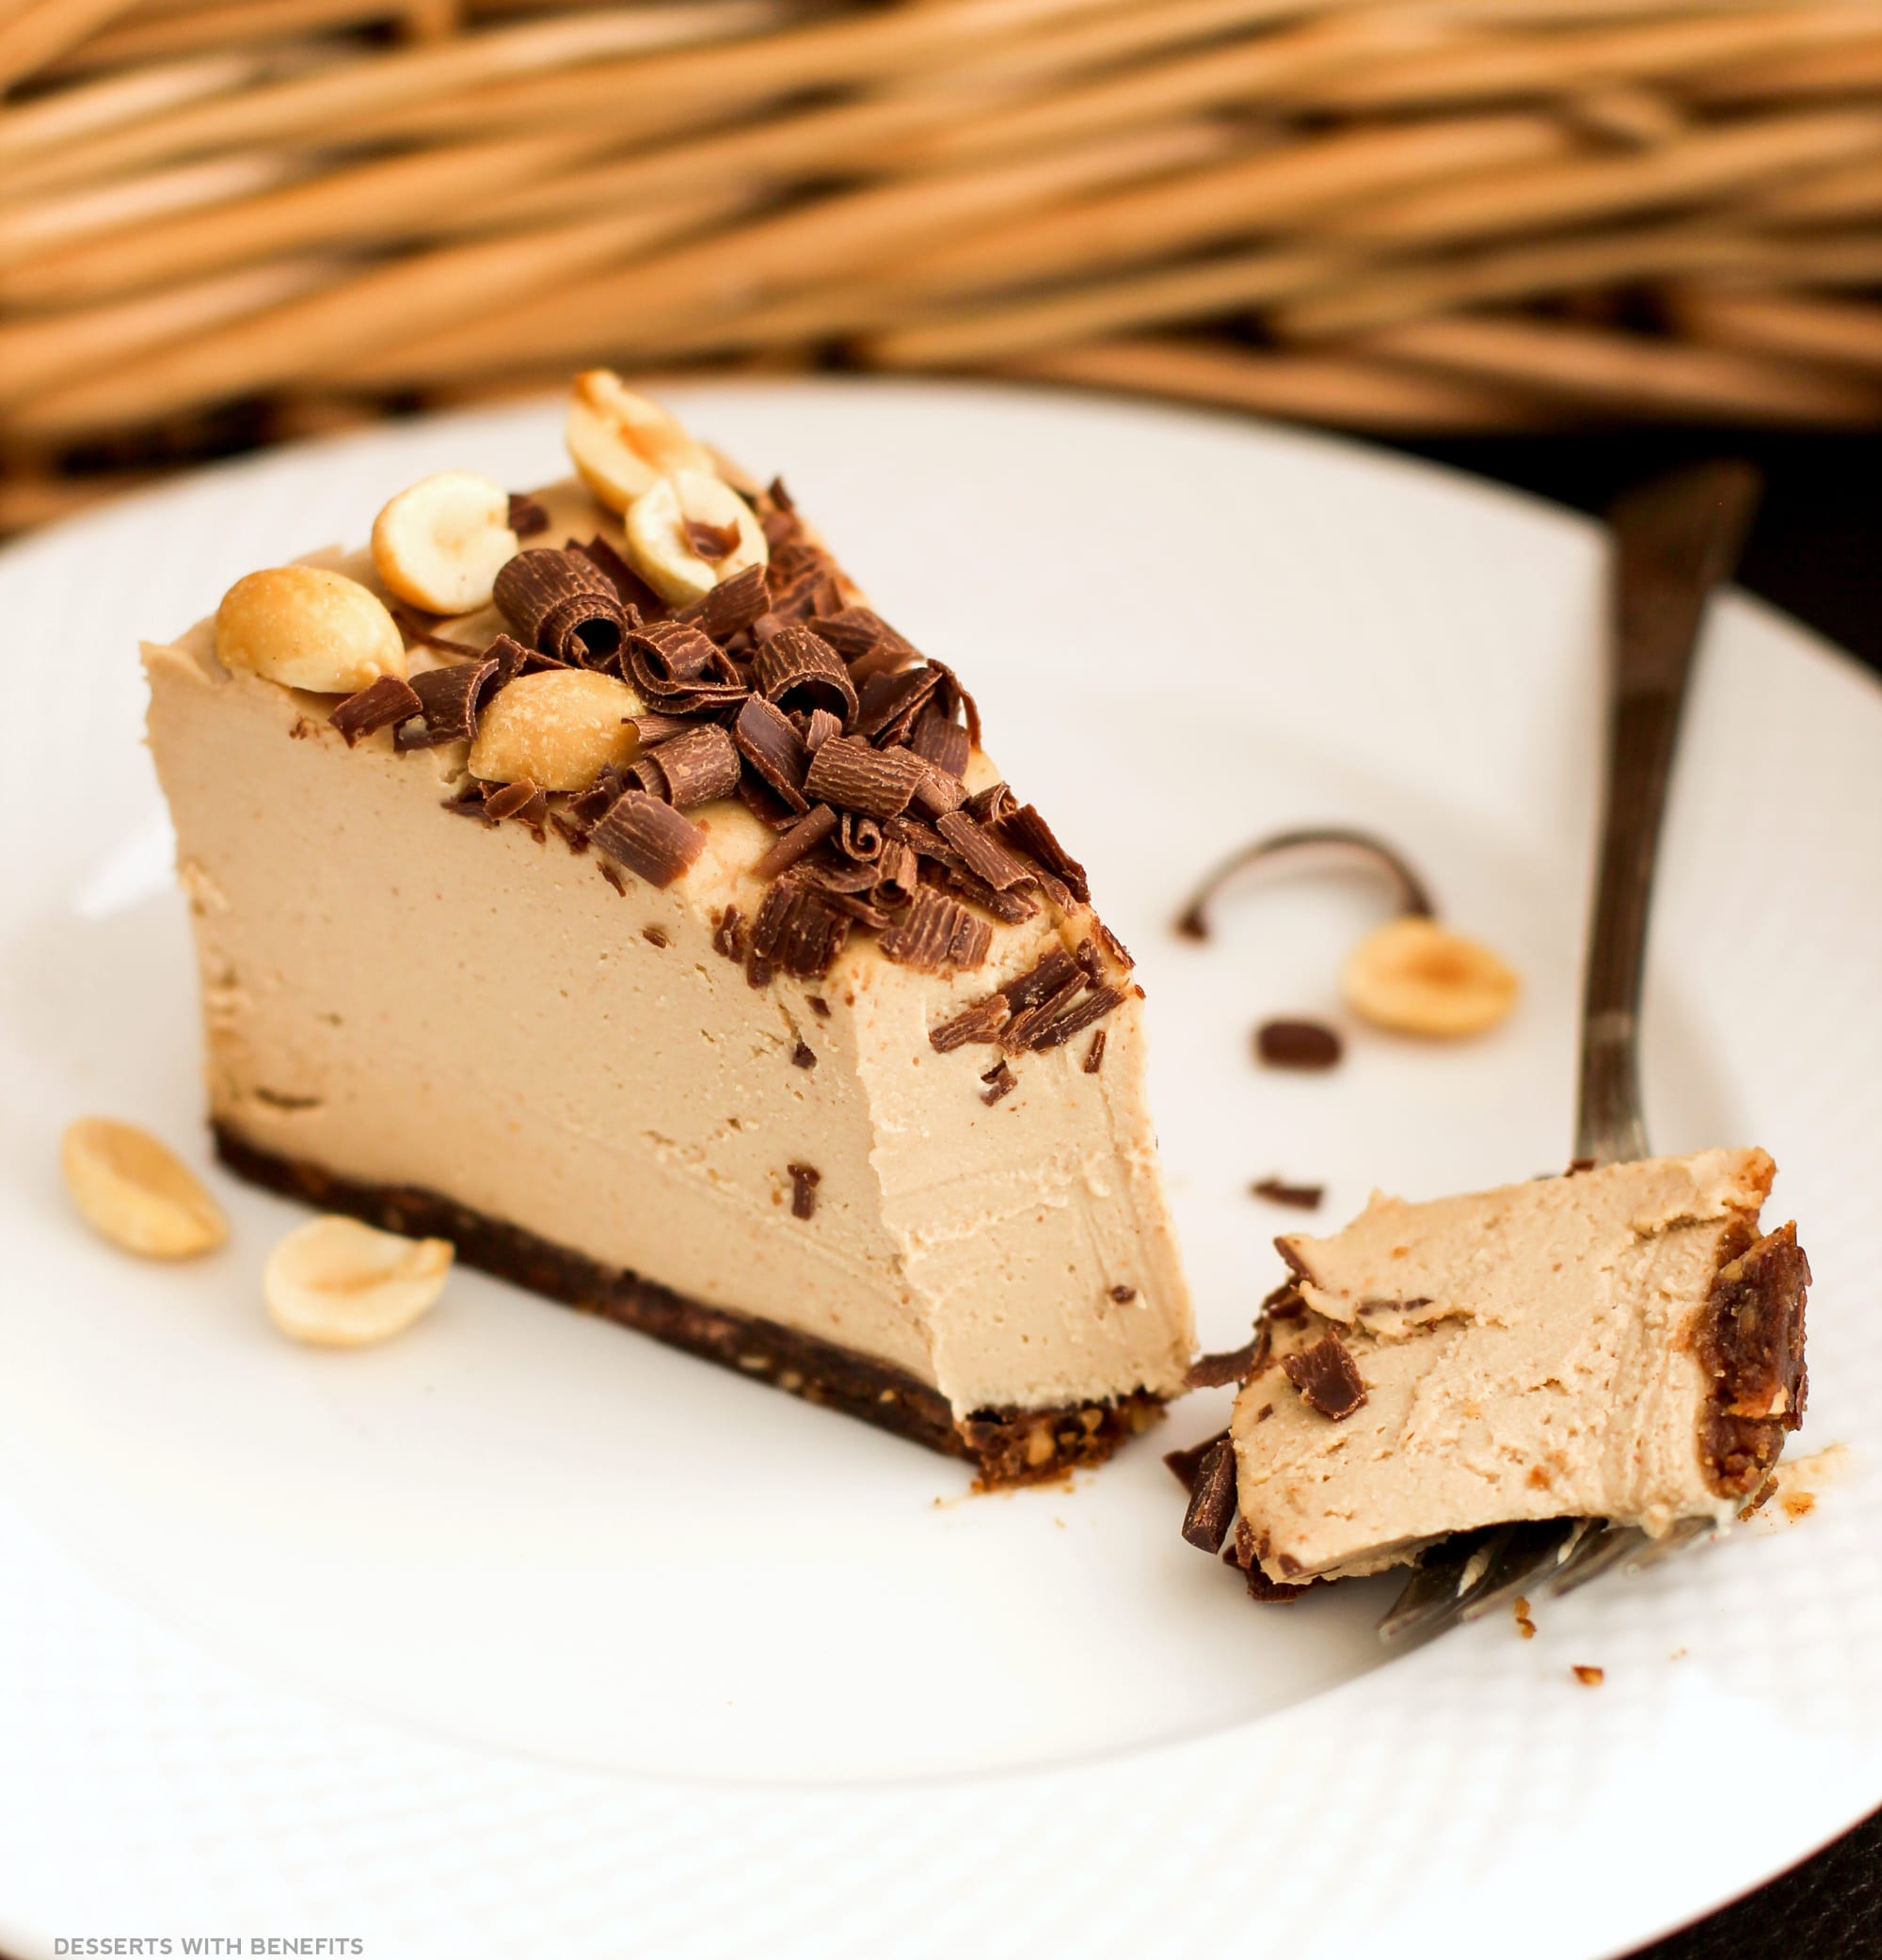 Healthy Dairy Free Desserts
 Healthy Chocolate Peanut Butter Raw Cheesecake